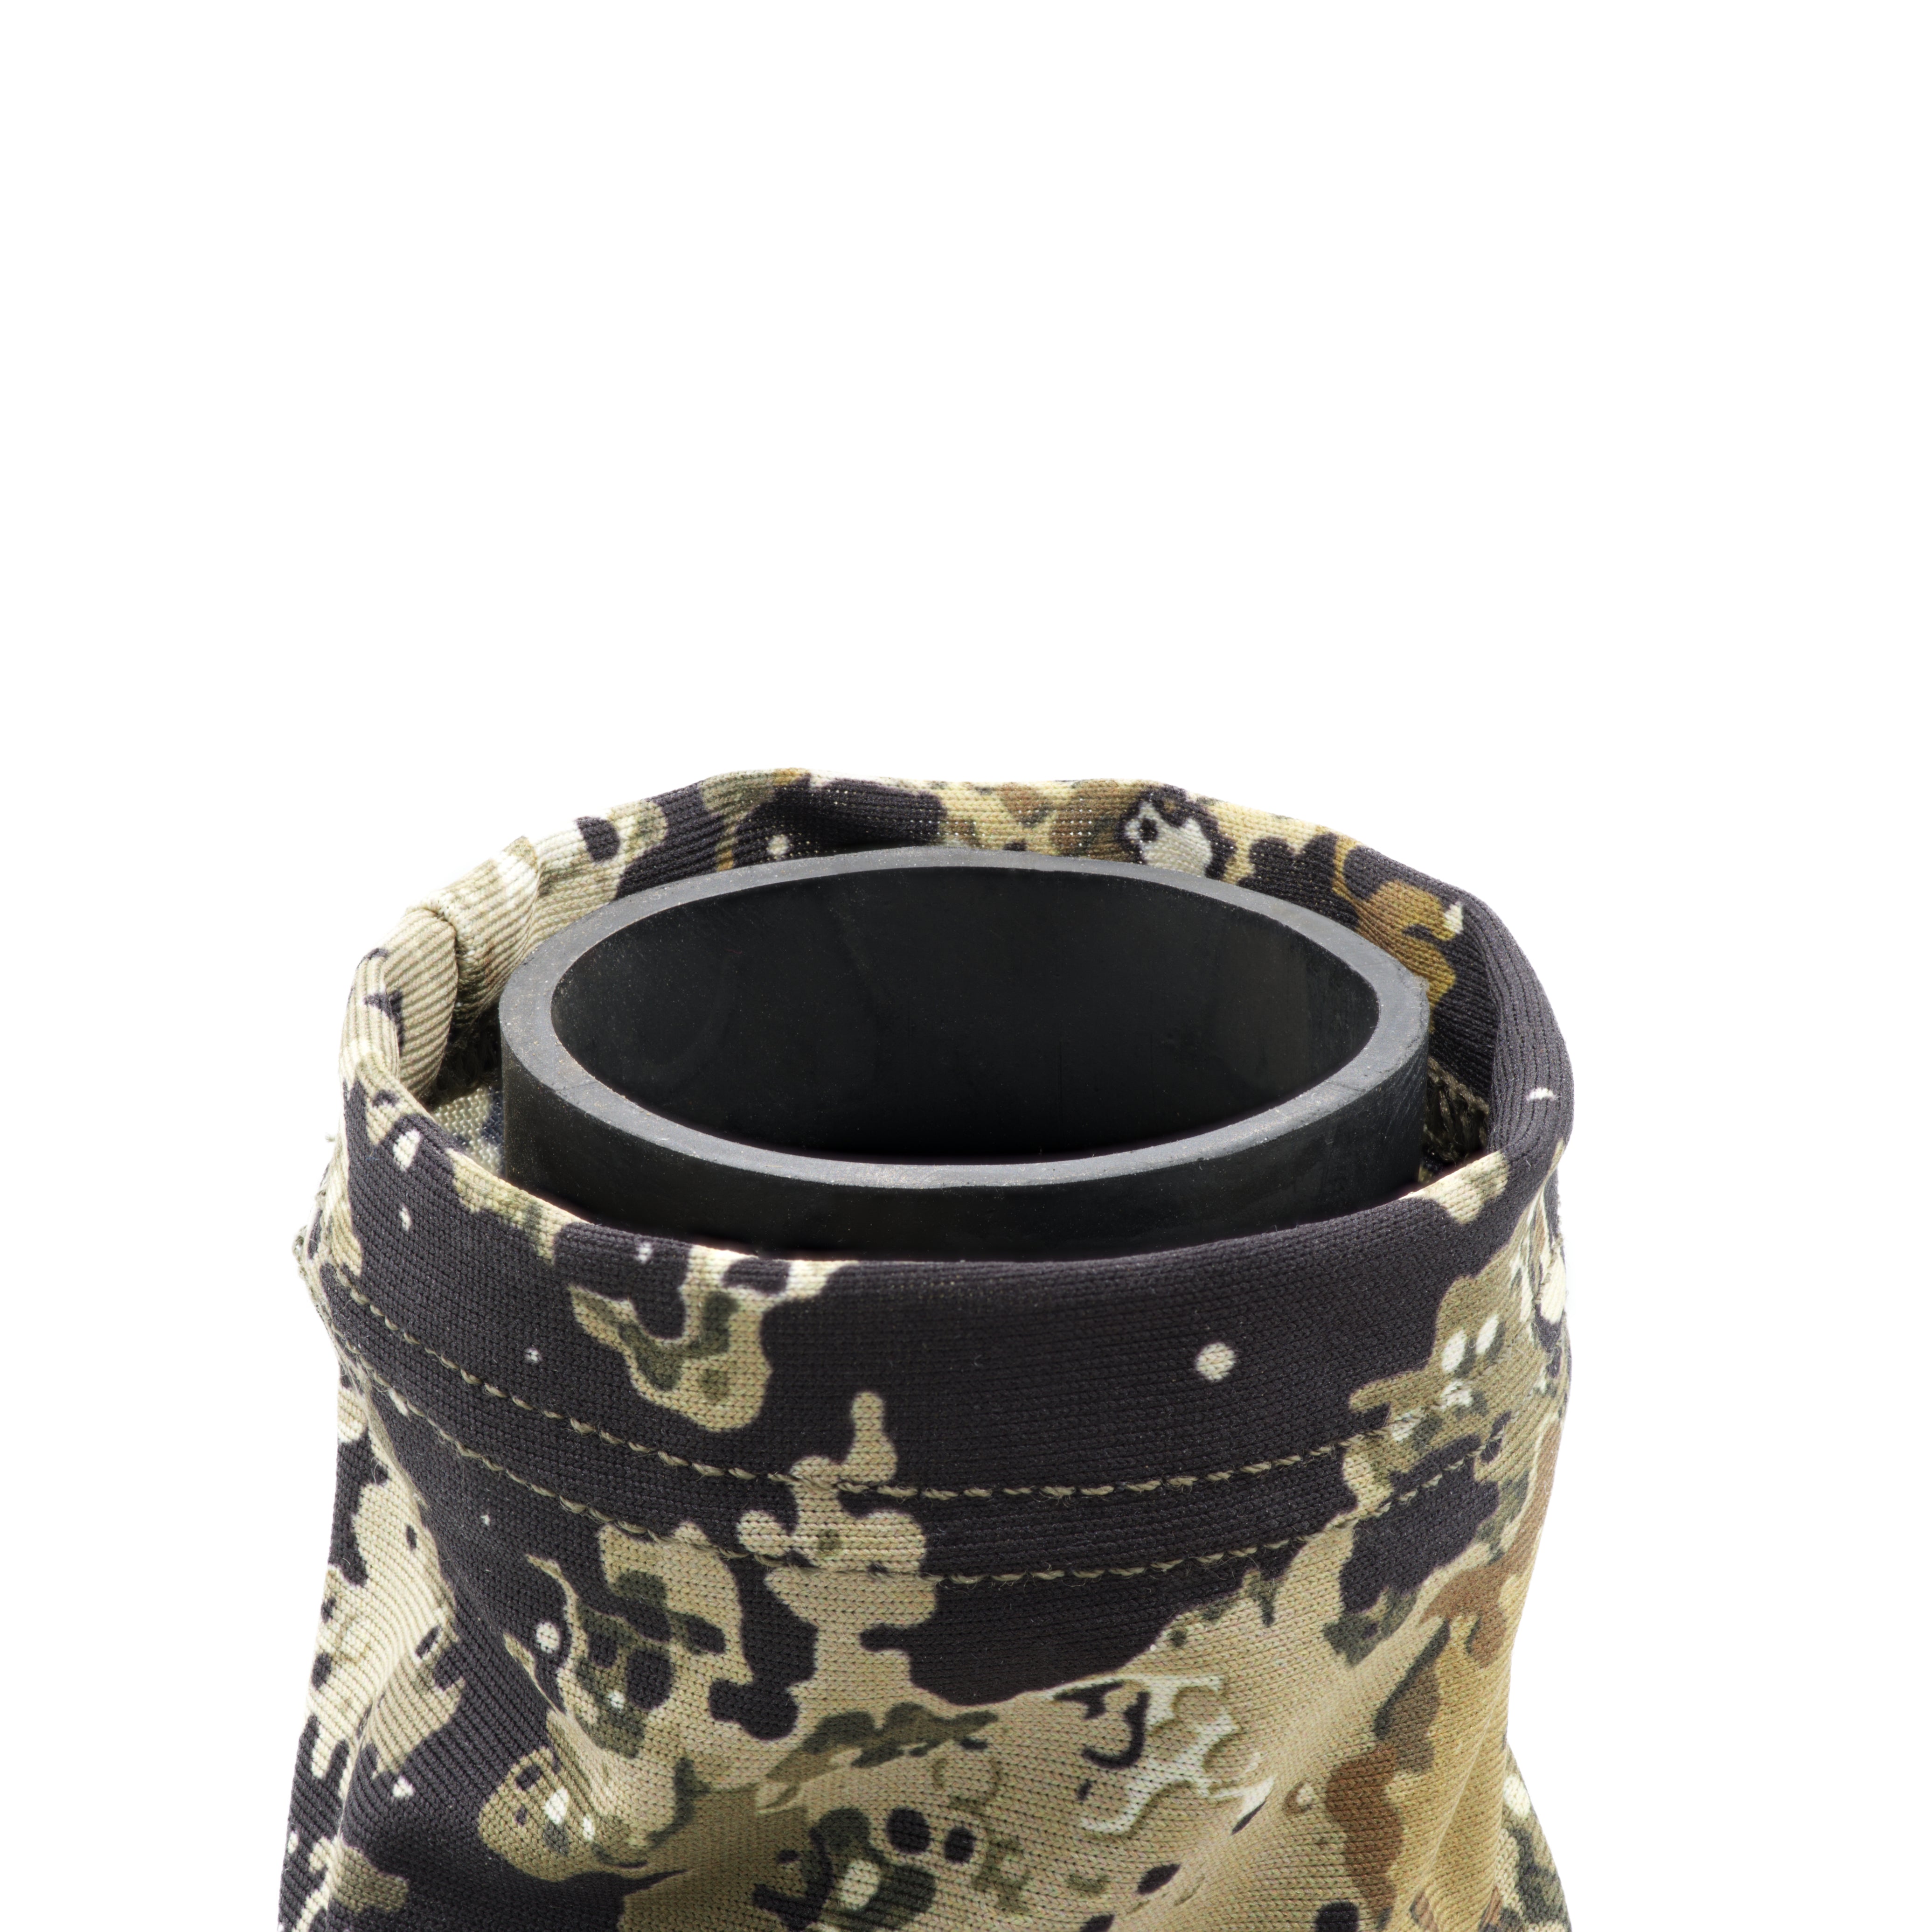 A close-up image of the mouthpiece of the Lil’ Big Horn Bugle Tube from Liberty Game Calls.